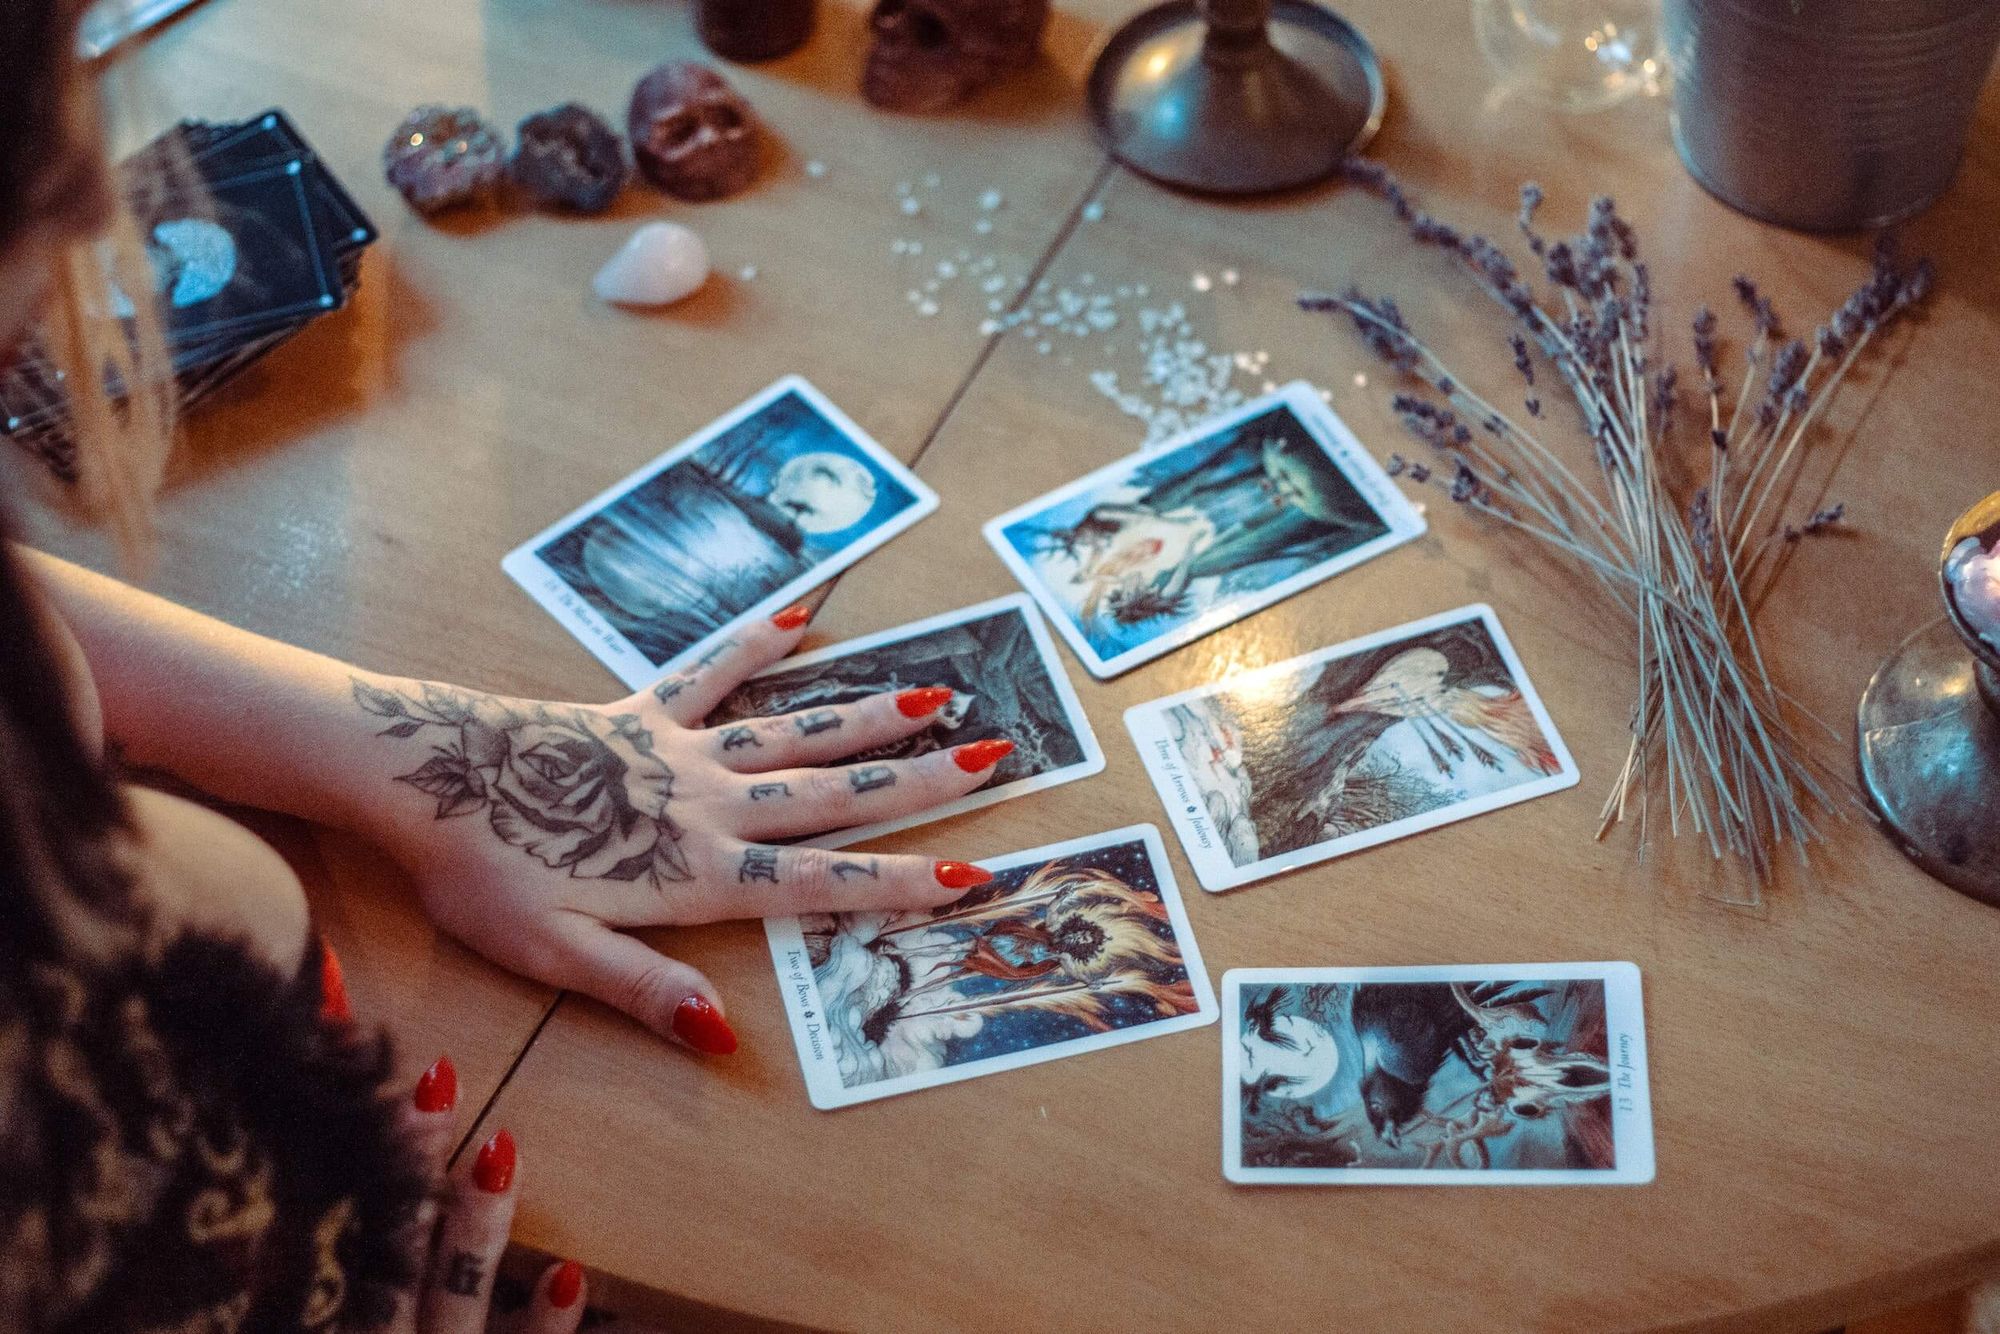 Woman with tattooed hands and red fingernails using tarot cards.